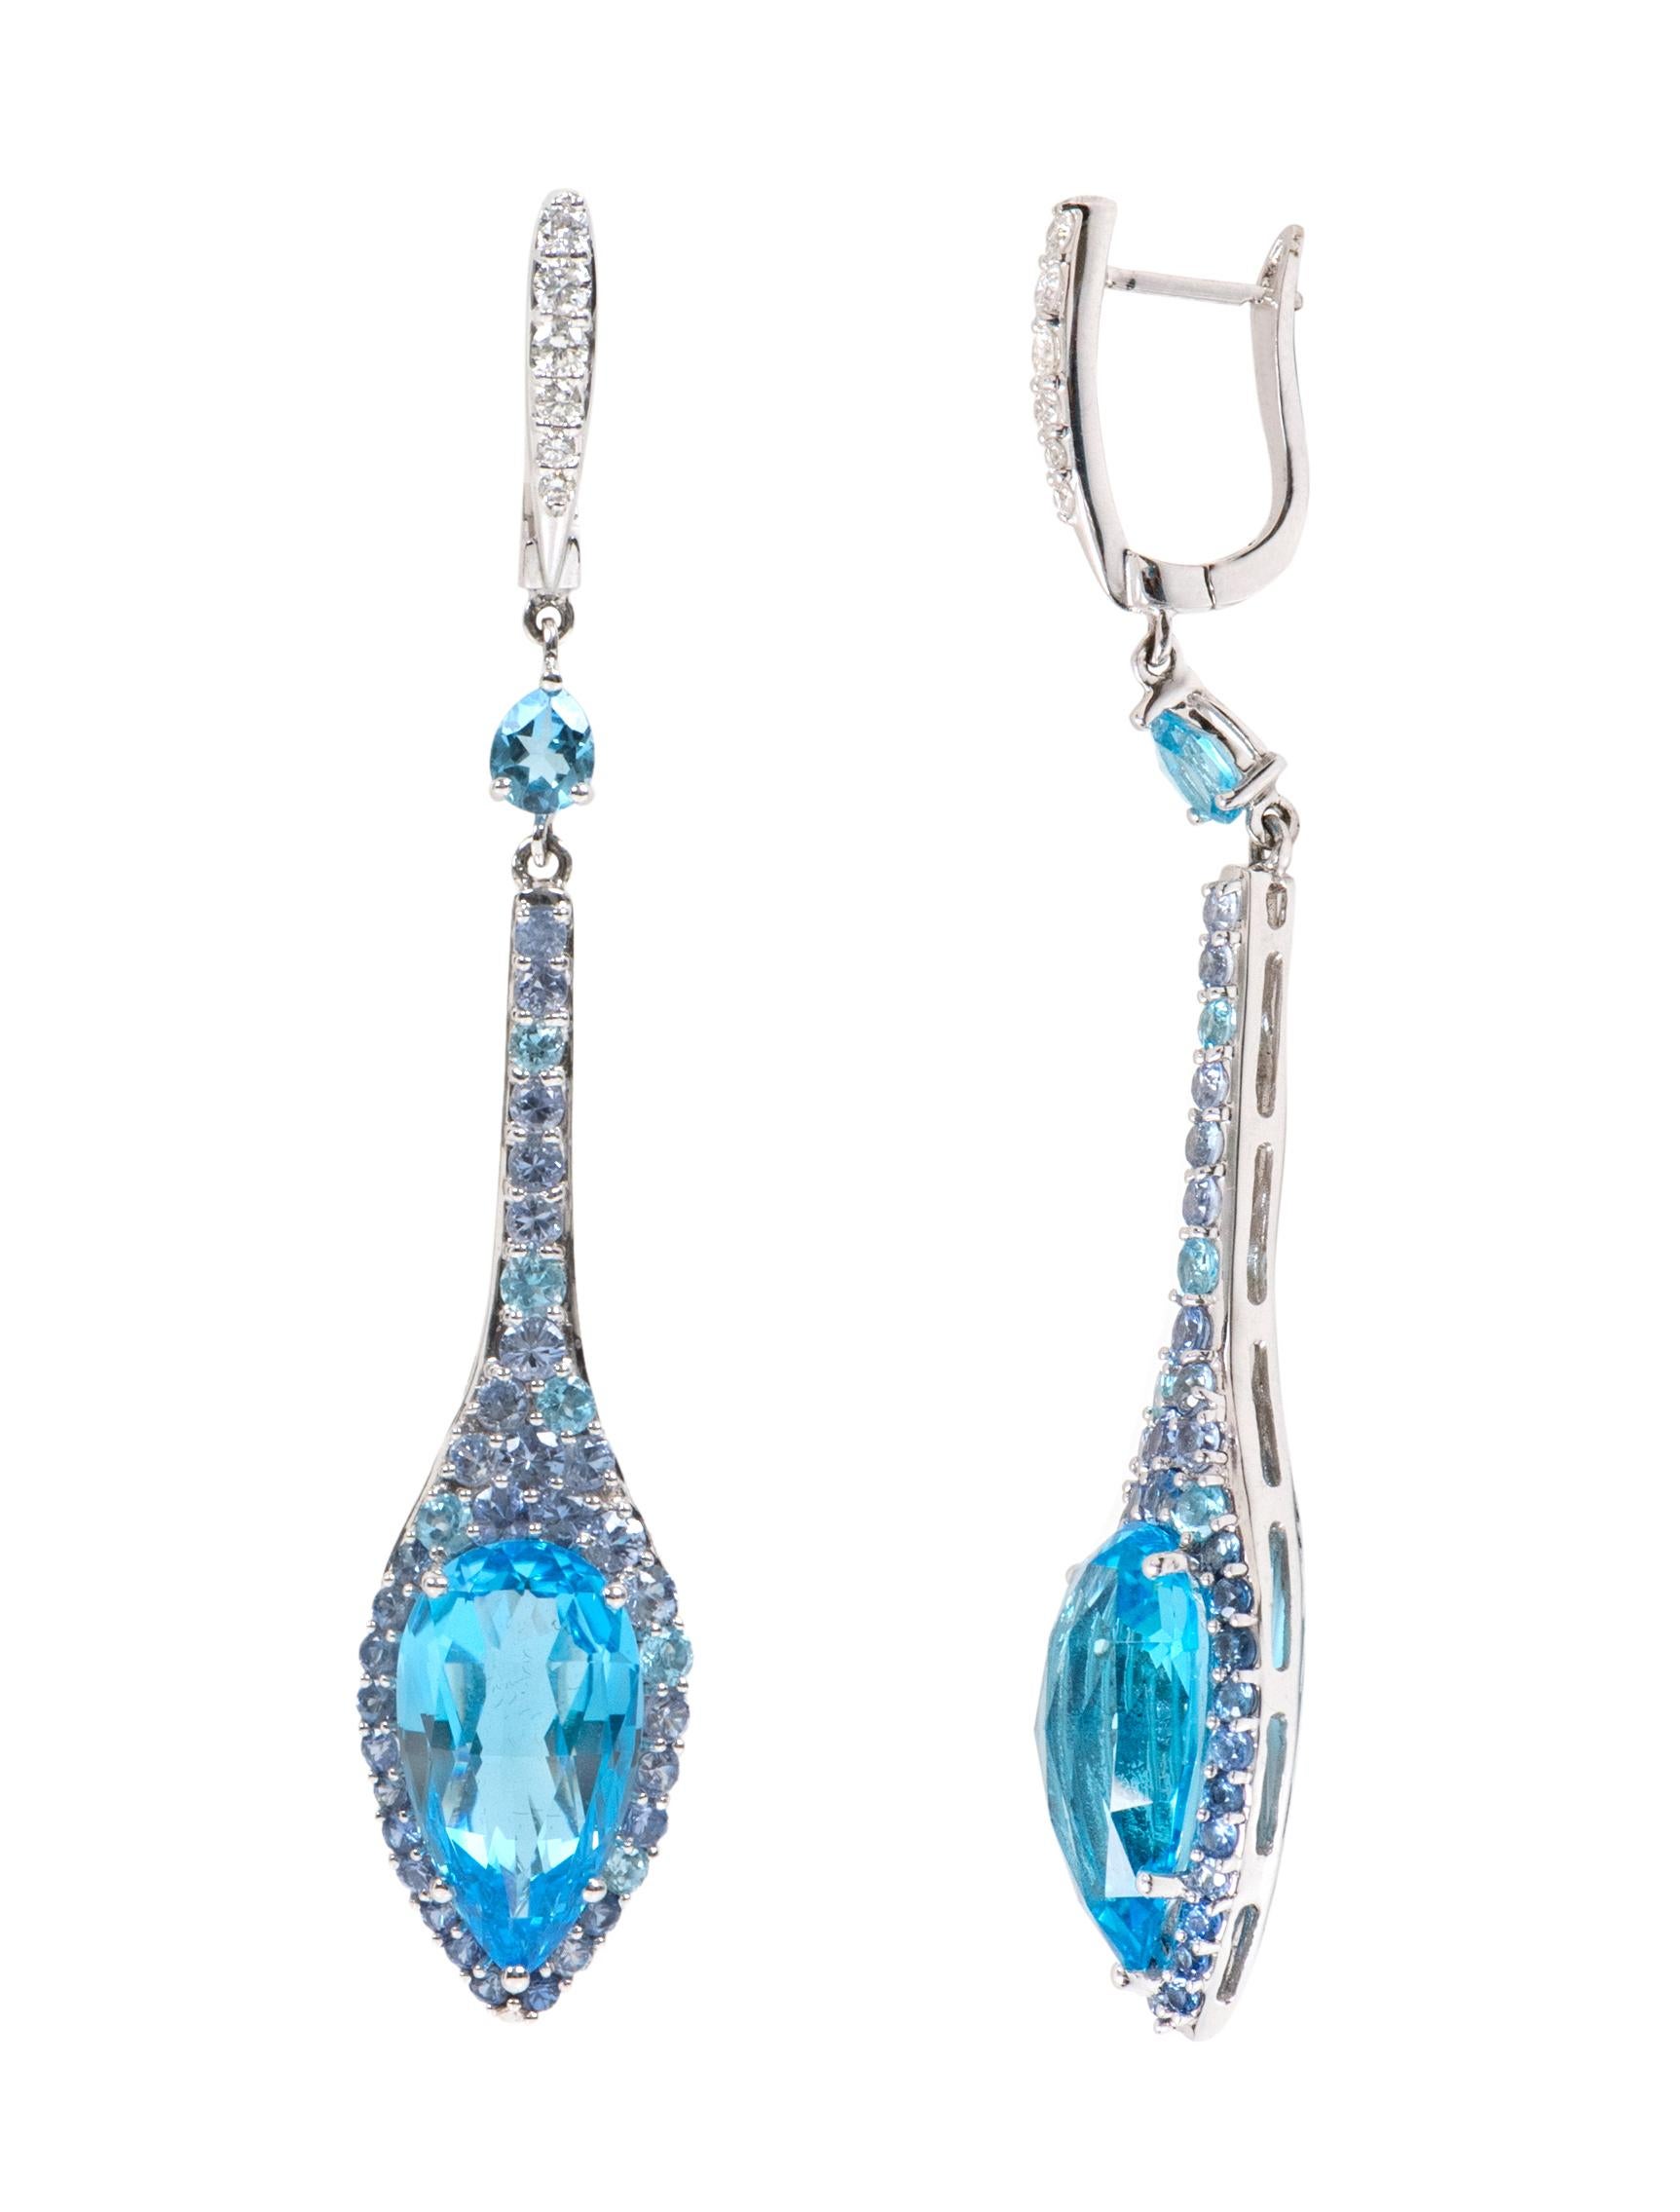 18 Karat White Gold 20.19 Carat Blue Topaz, Diamond, and Tanzanite Drop Earrings

This impeccable London blue topaz, violet blue tanzanite and diamond long drop earring is marvelous. The inverted pear drop of the solitaire blue topaz is the